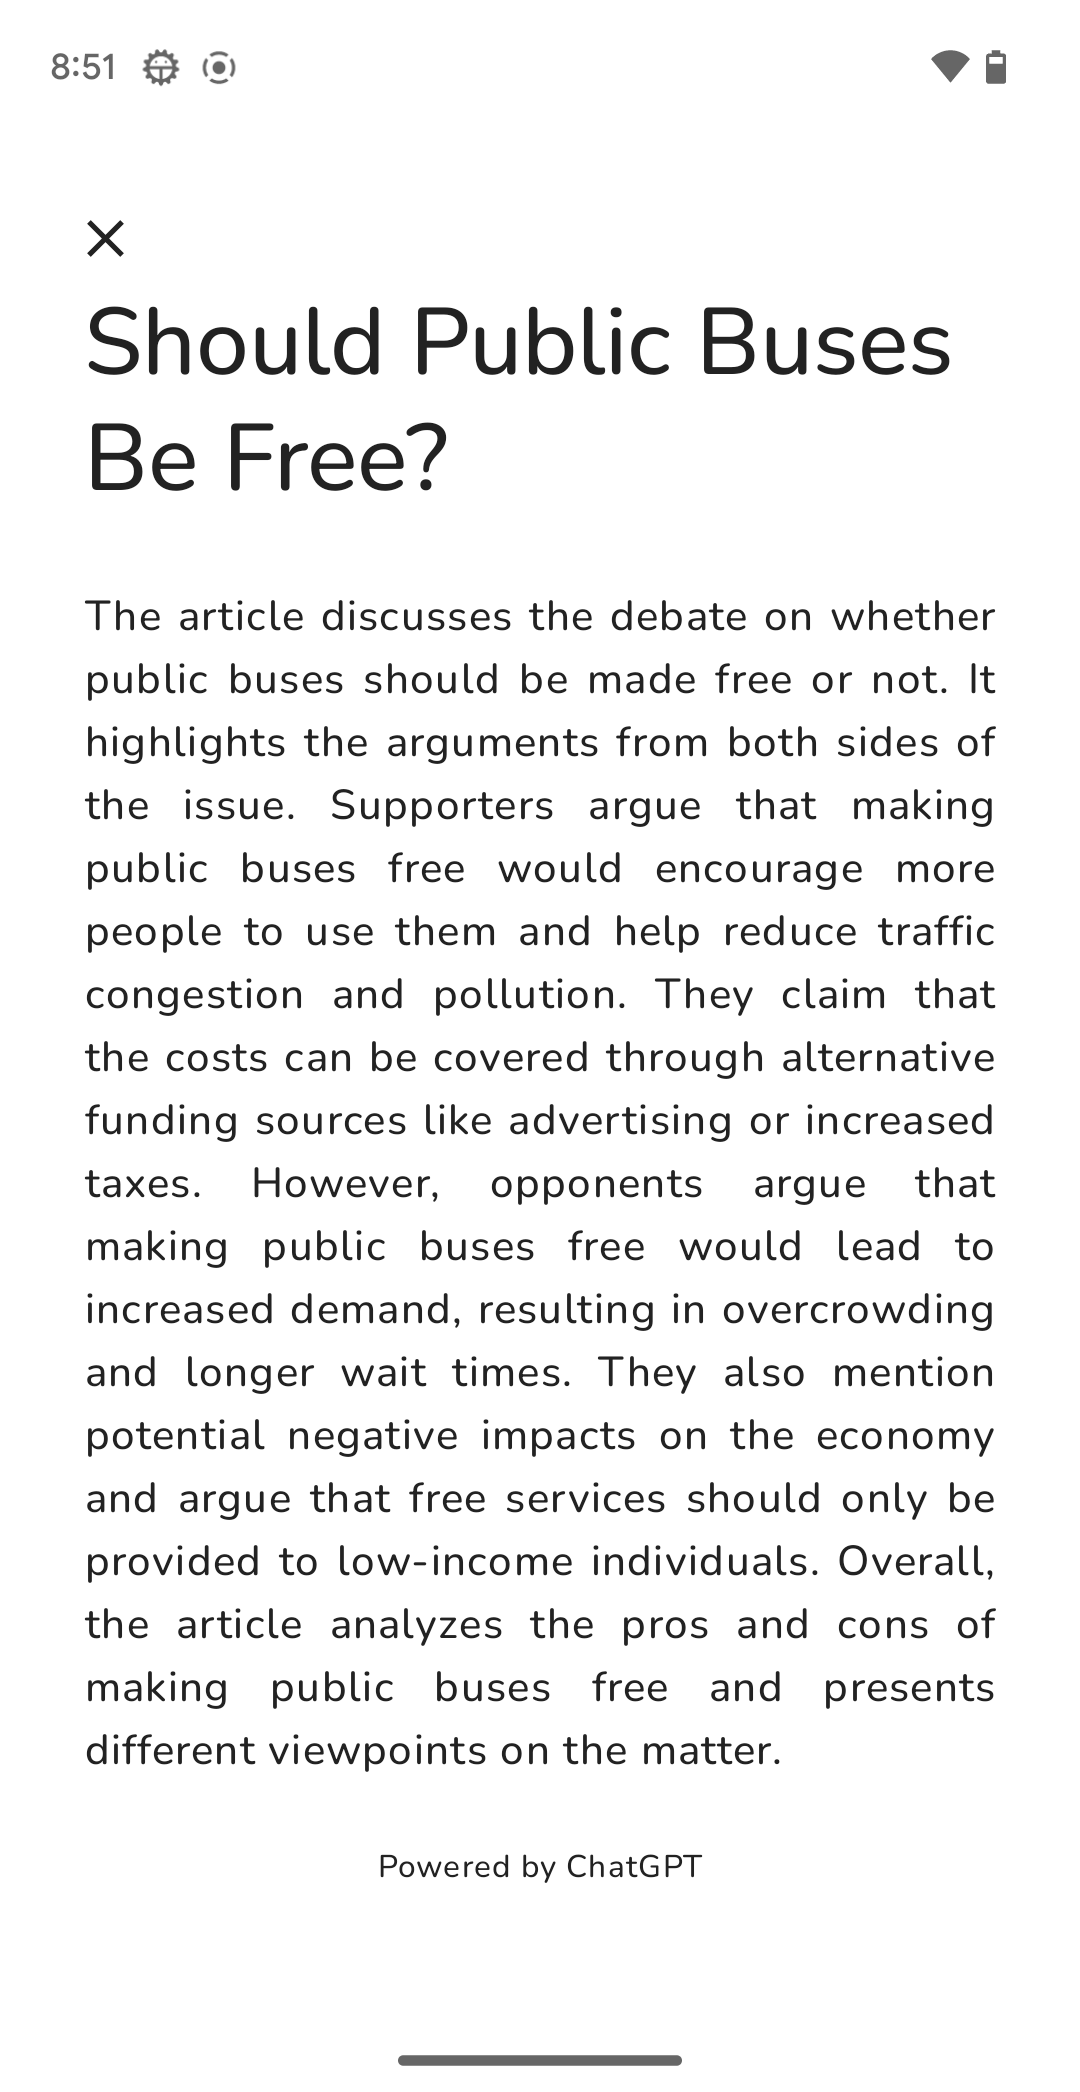 A simple text screen that summarizes an article about whether buses should be free.